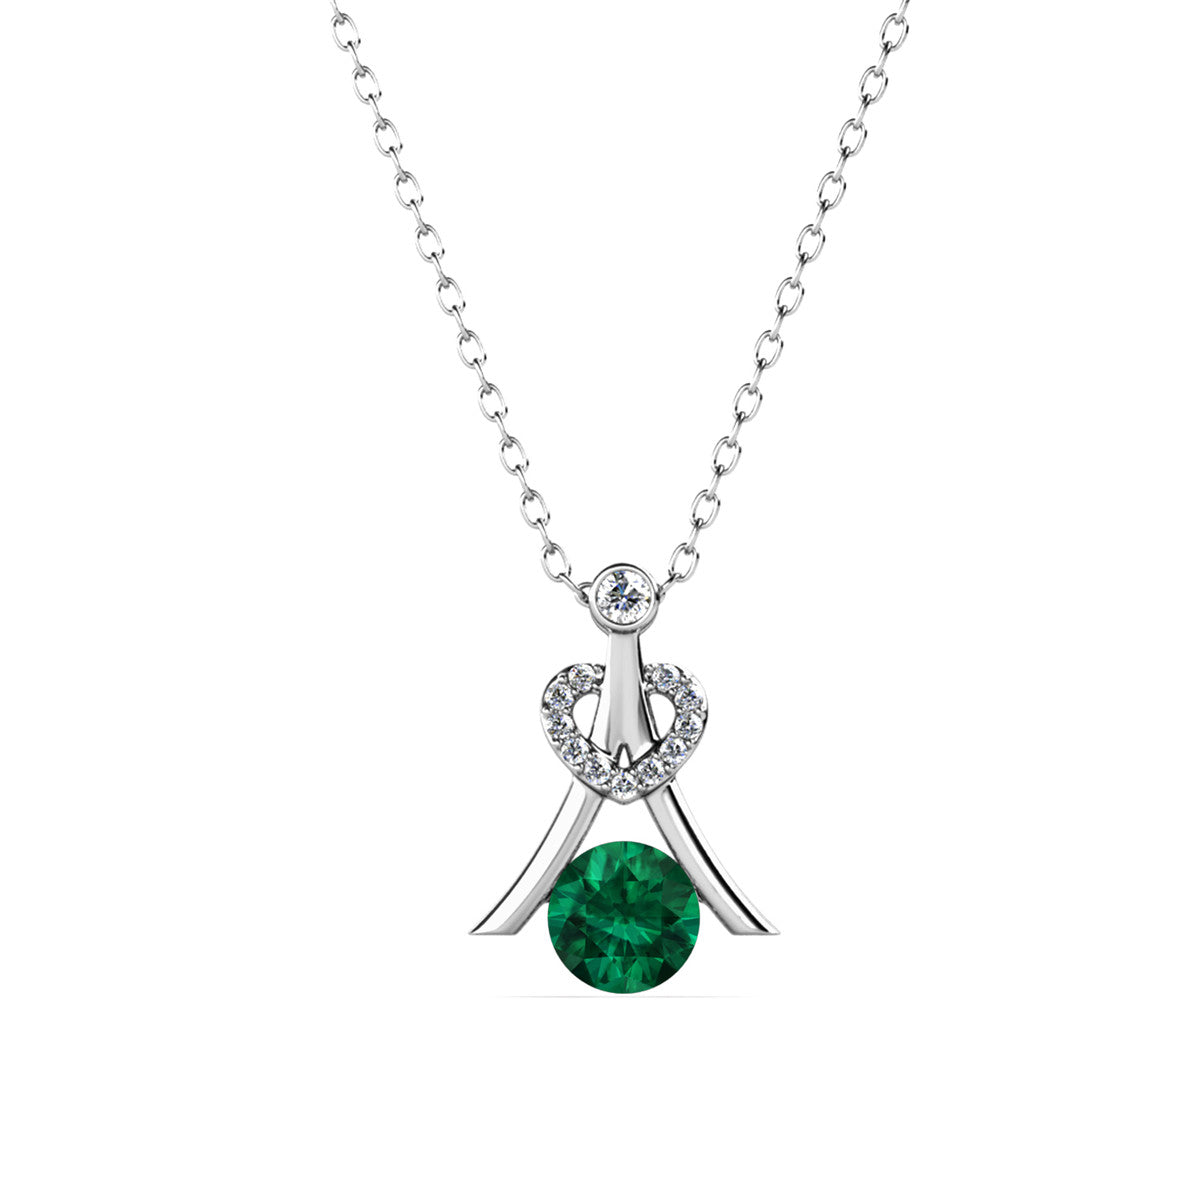 Serenity May Birthstone Emerald Necklace, 18k White Gold Plated Silver Necklace with Round Cut Crystals